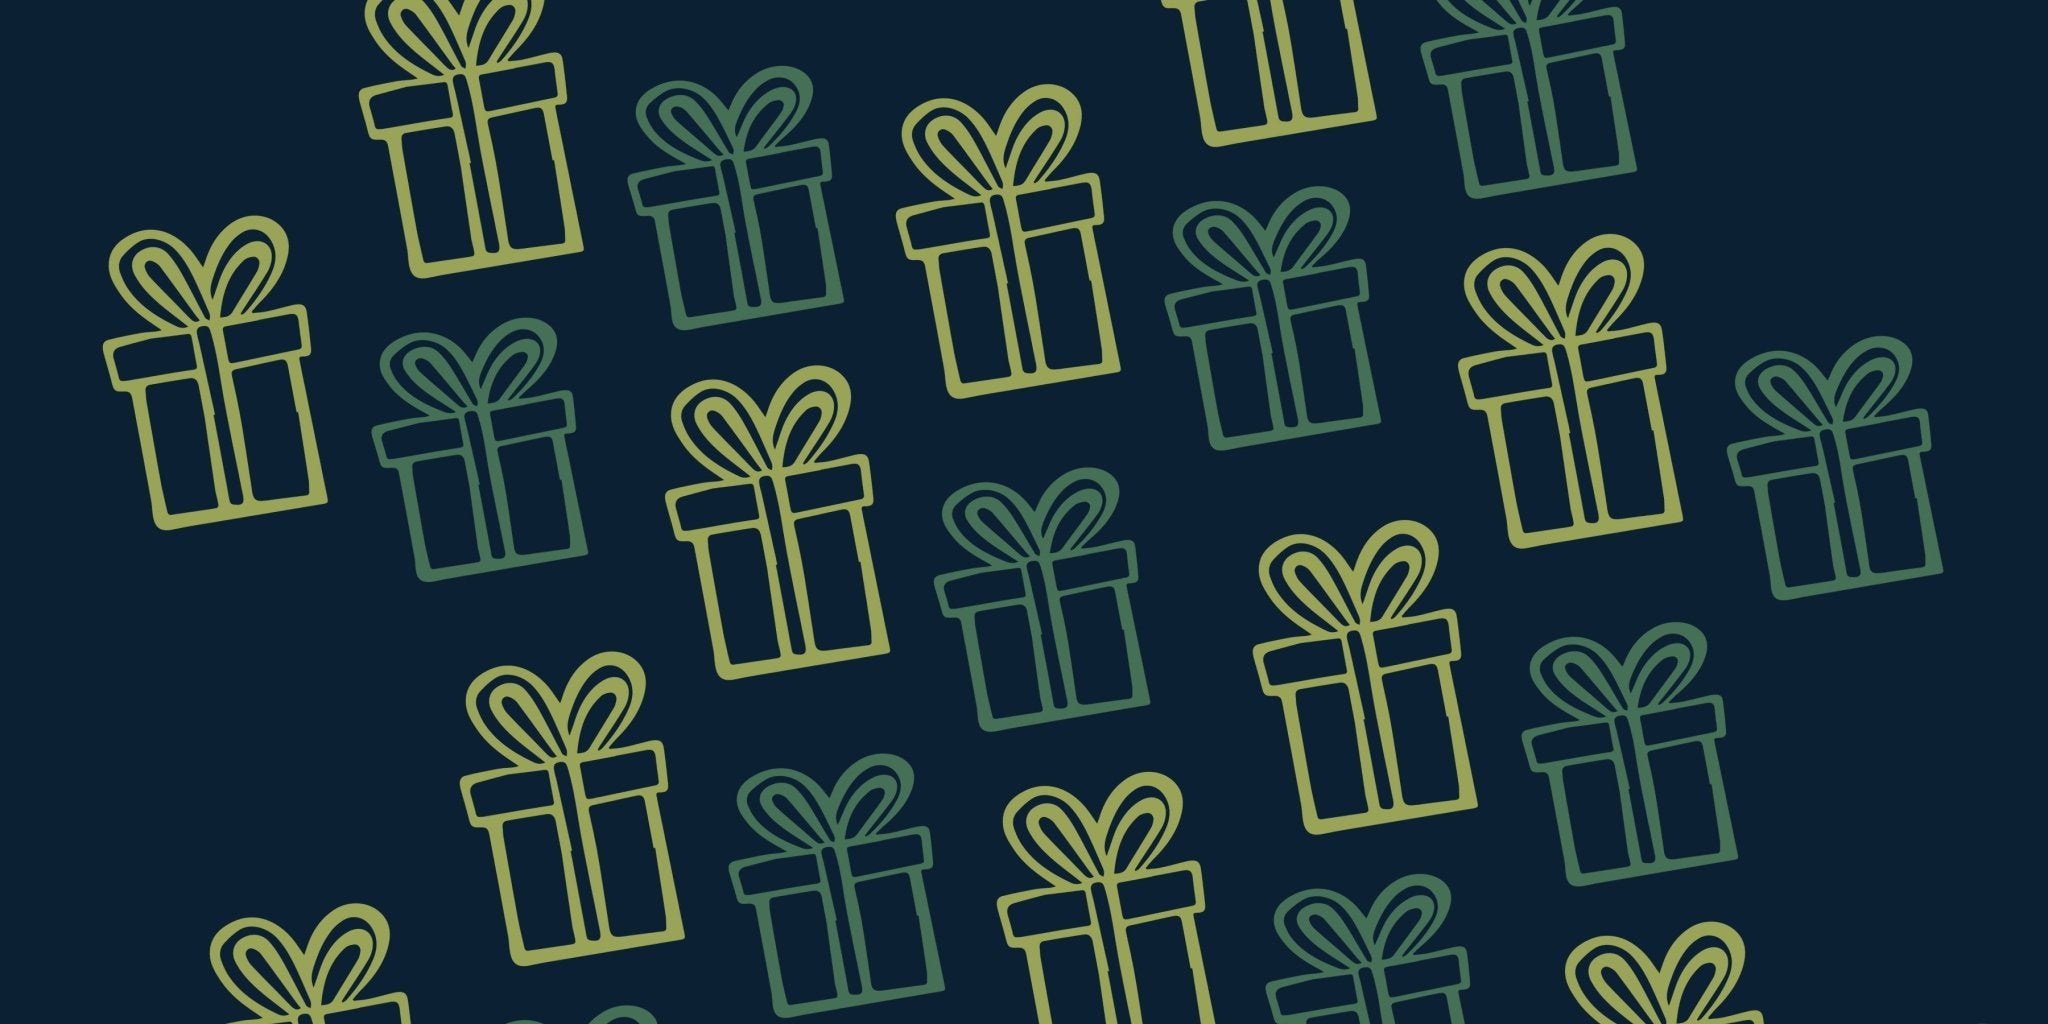 December Challenge: Sustainable Wrapping - Happy Earth®